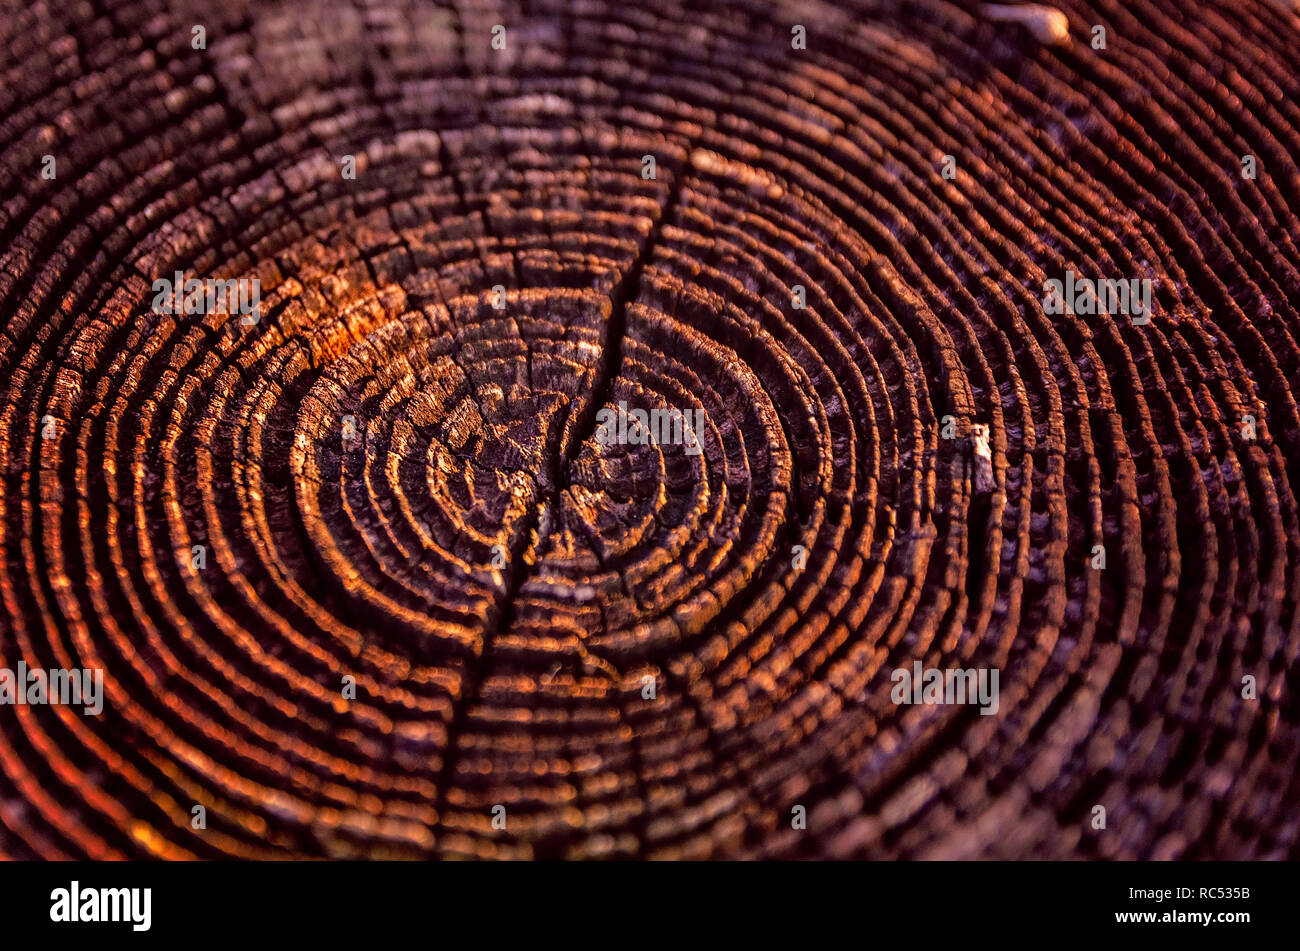 The rungs of a cut tree are visible, creating a circular pattern. Stock Photo